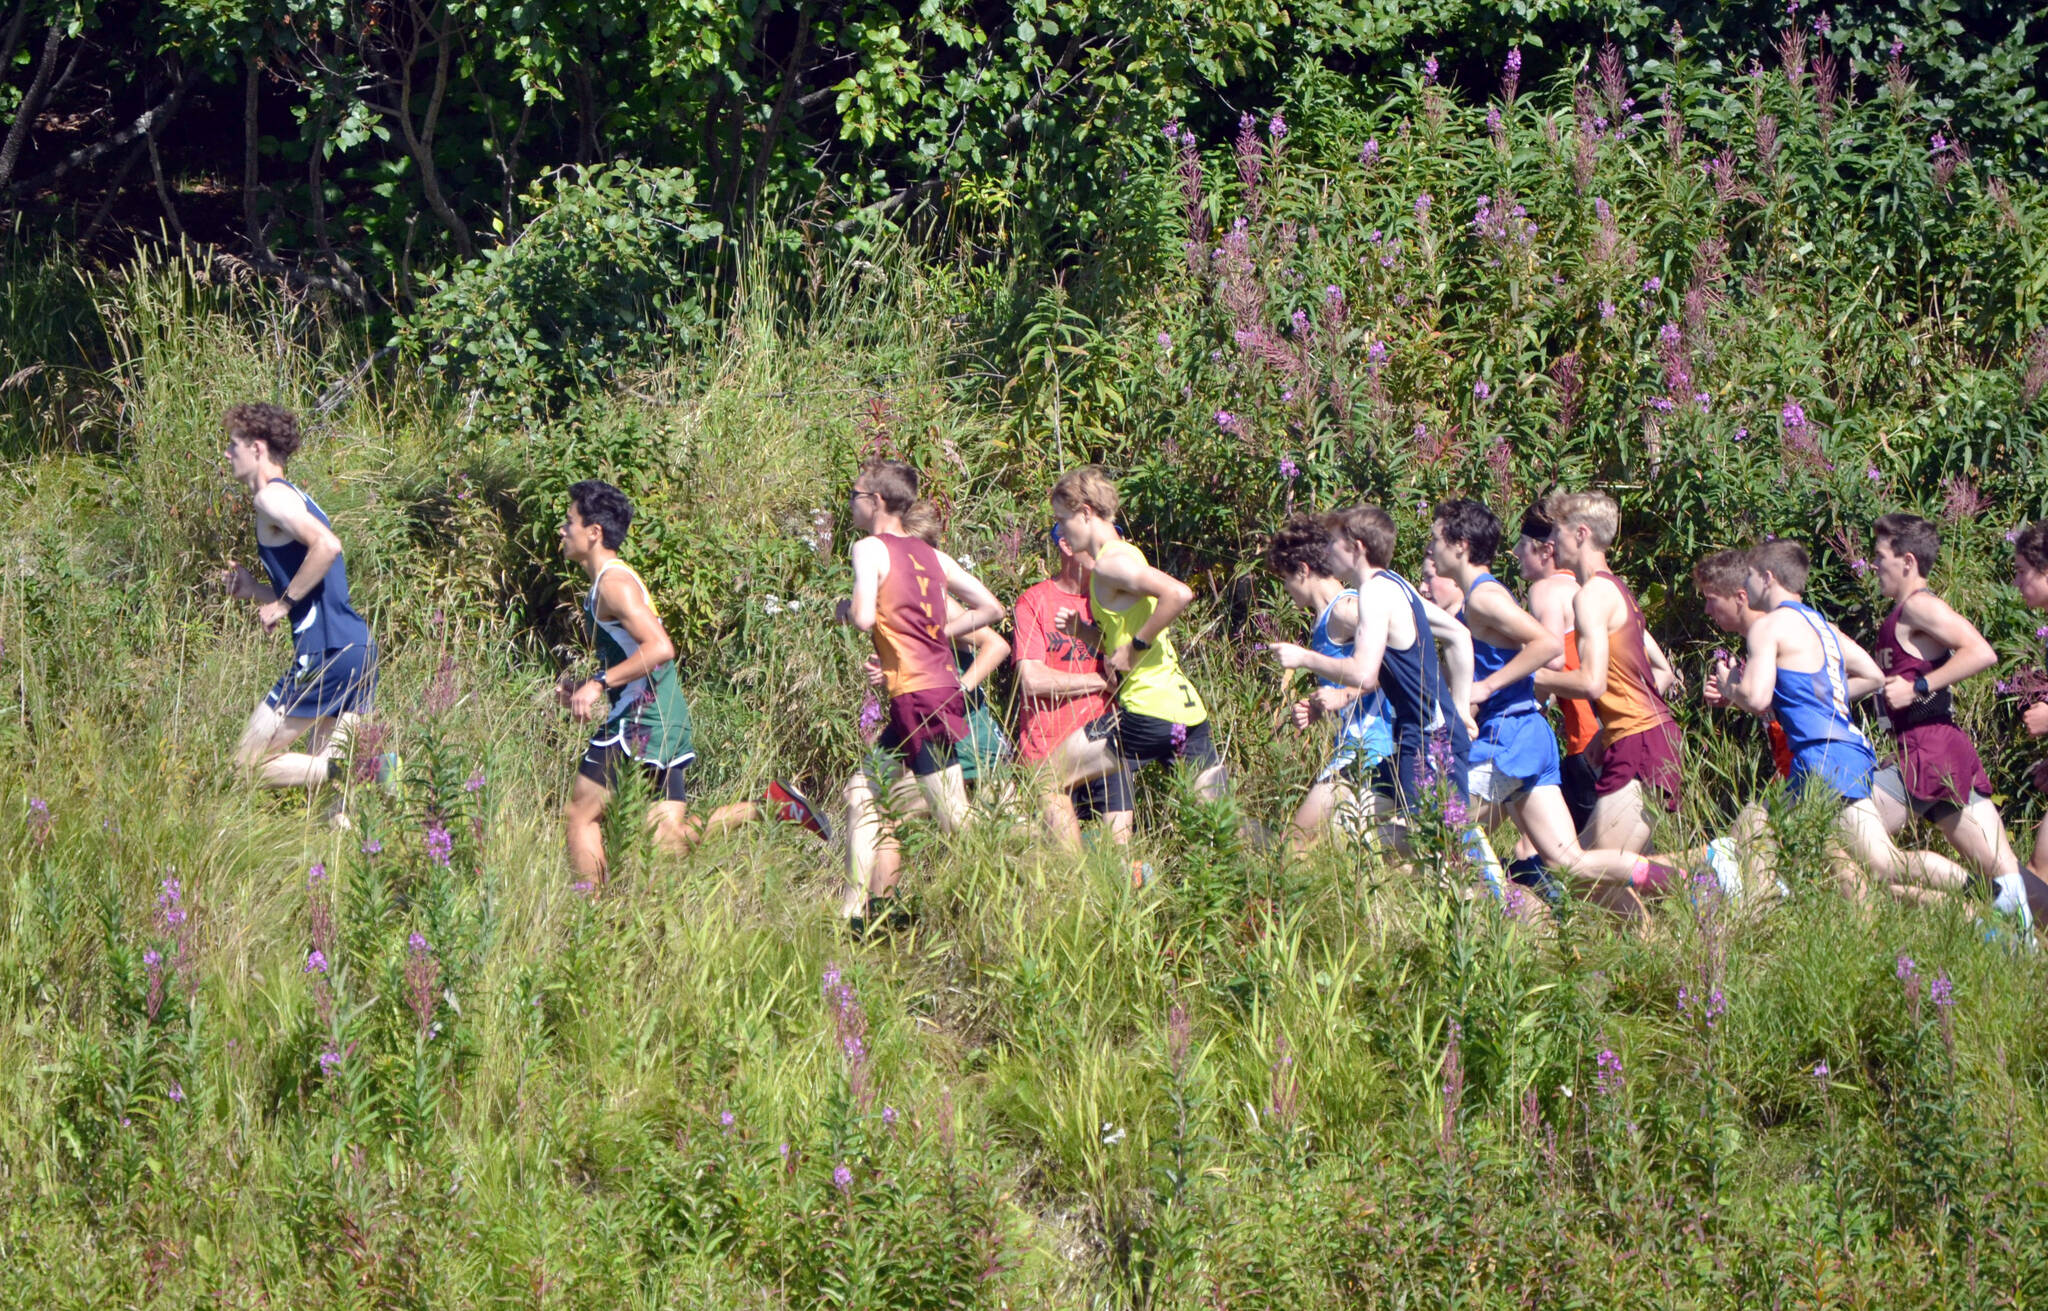 Runners participate in boys varsity race at the Ted McKenney XC Invitational on Saturday, Aug. 21, 2021, at Tsalteshi Trails just outside of Soldotna, Alaska. The trails recently reported incidents of vandalism and theft. (Photo by Jeff Helminiak/Peninsula Clarion)